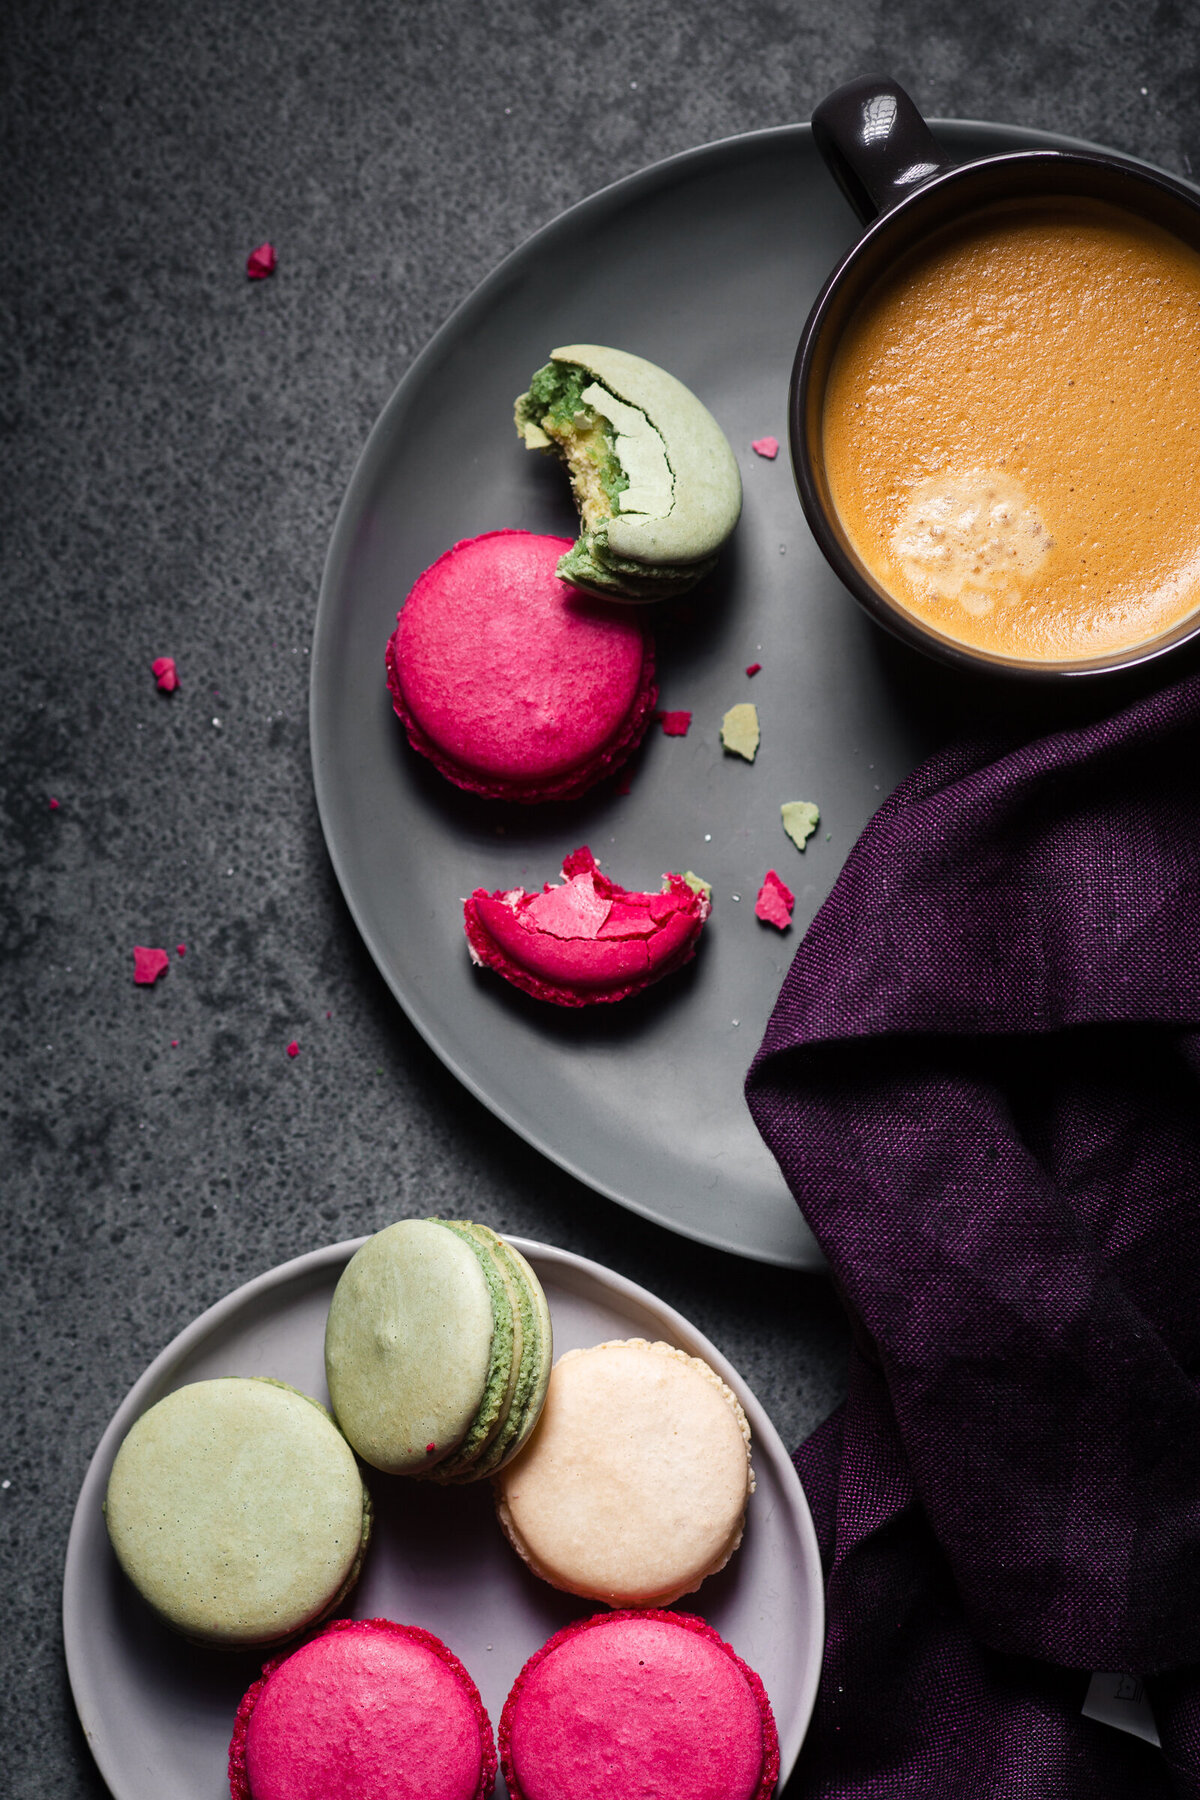 Coffee and French macarons - Food Photography - Frenchly Photographer-6230